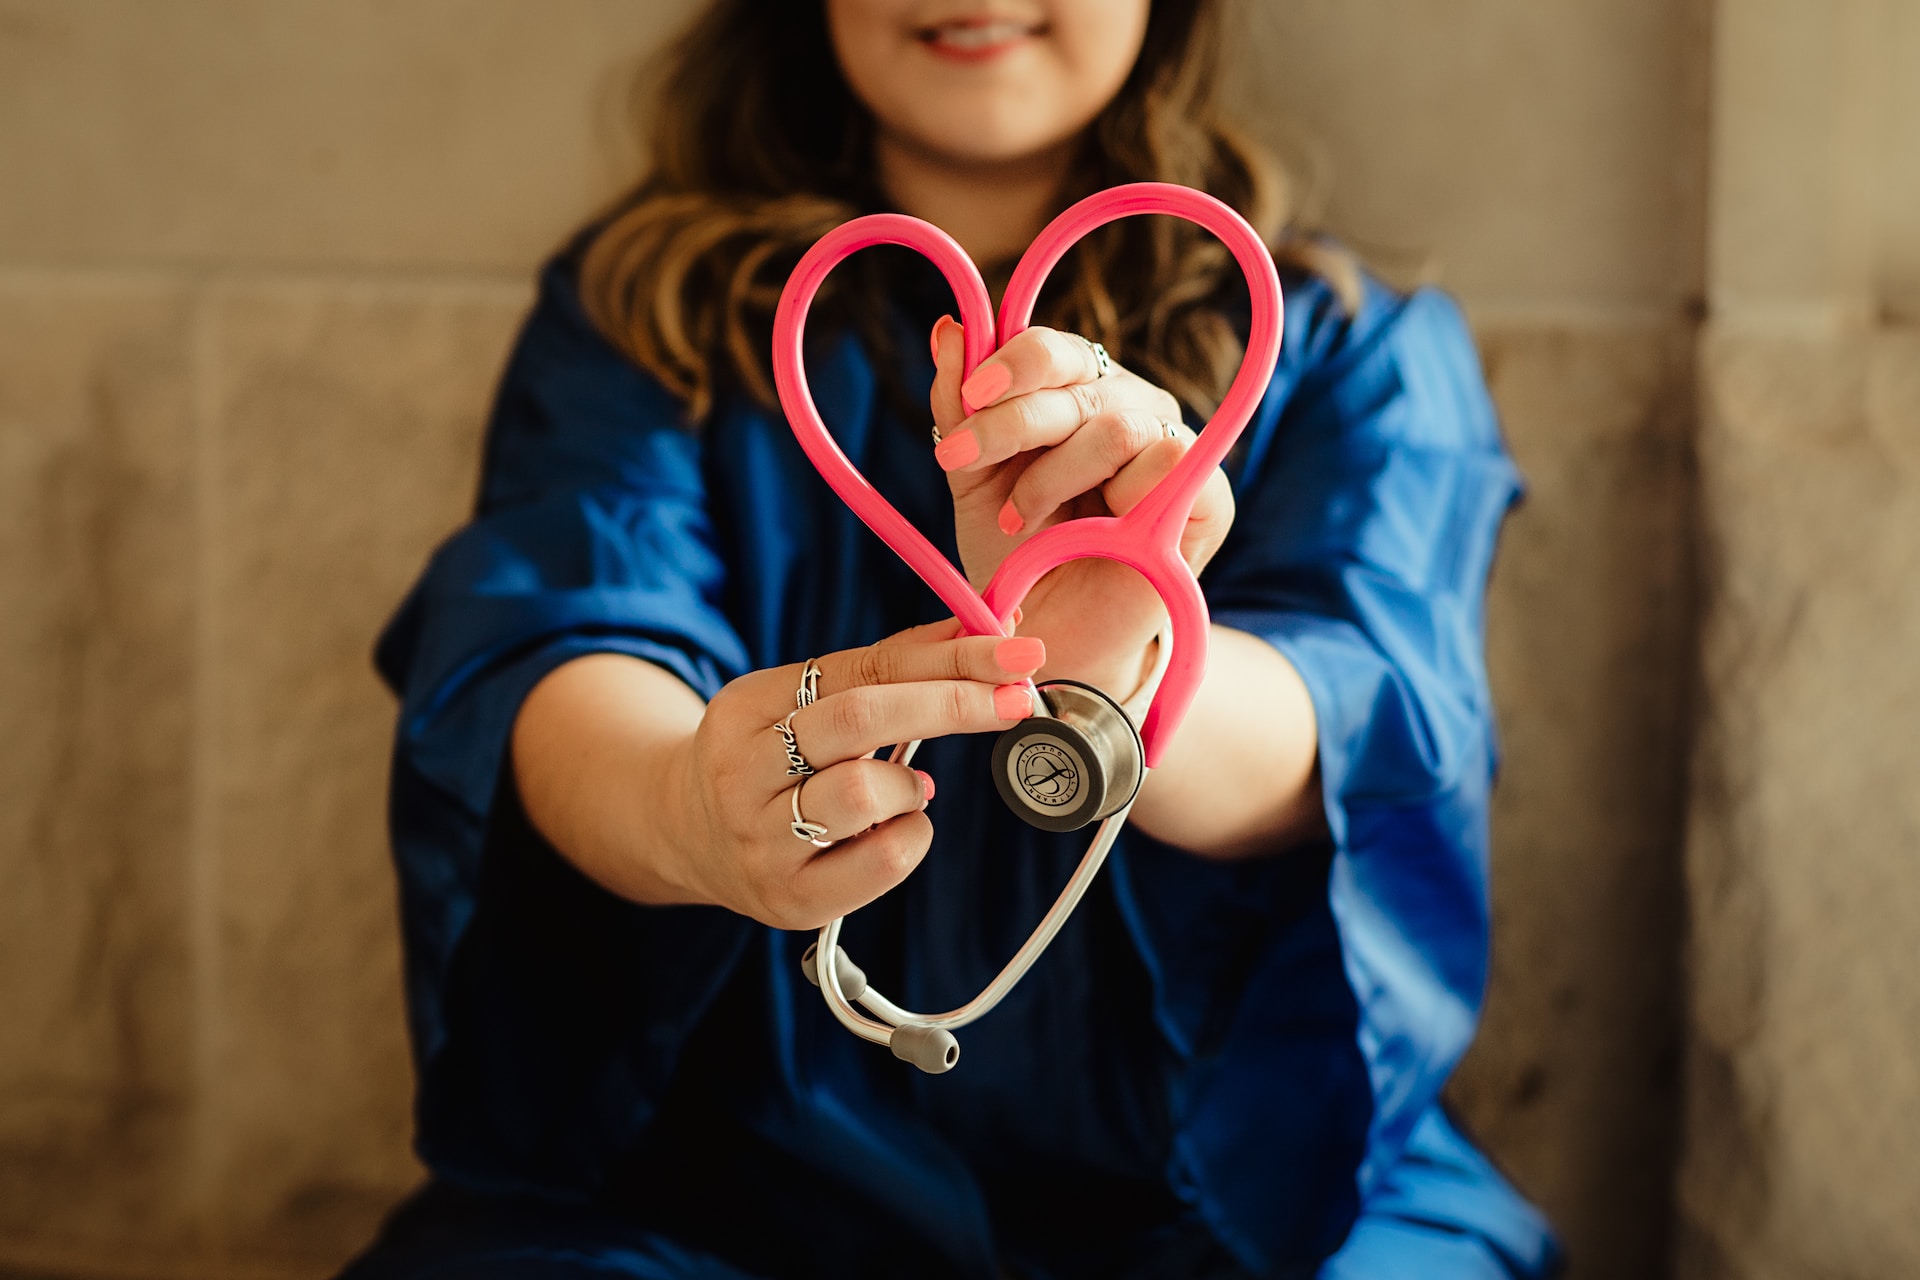 Nurse with a stethoscope in the shape of a heart